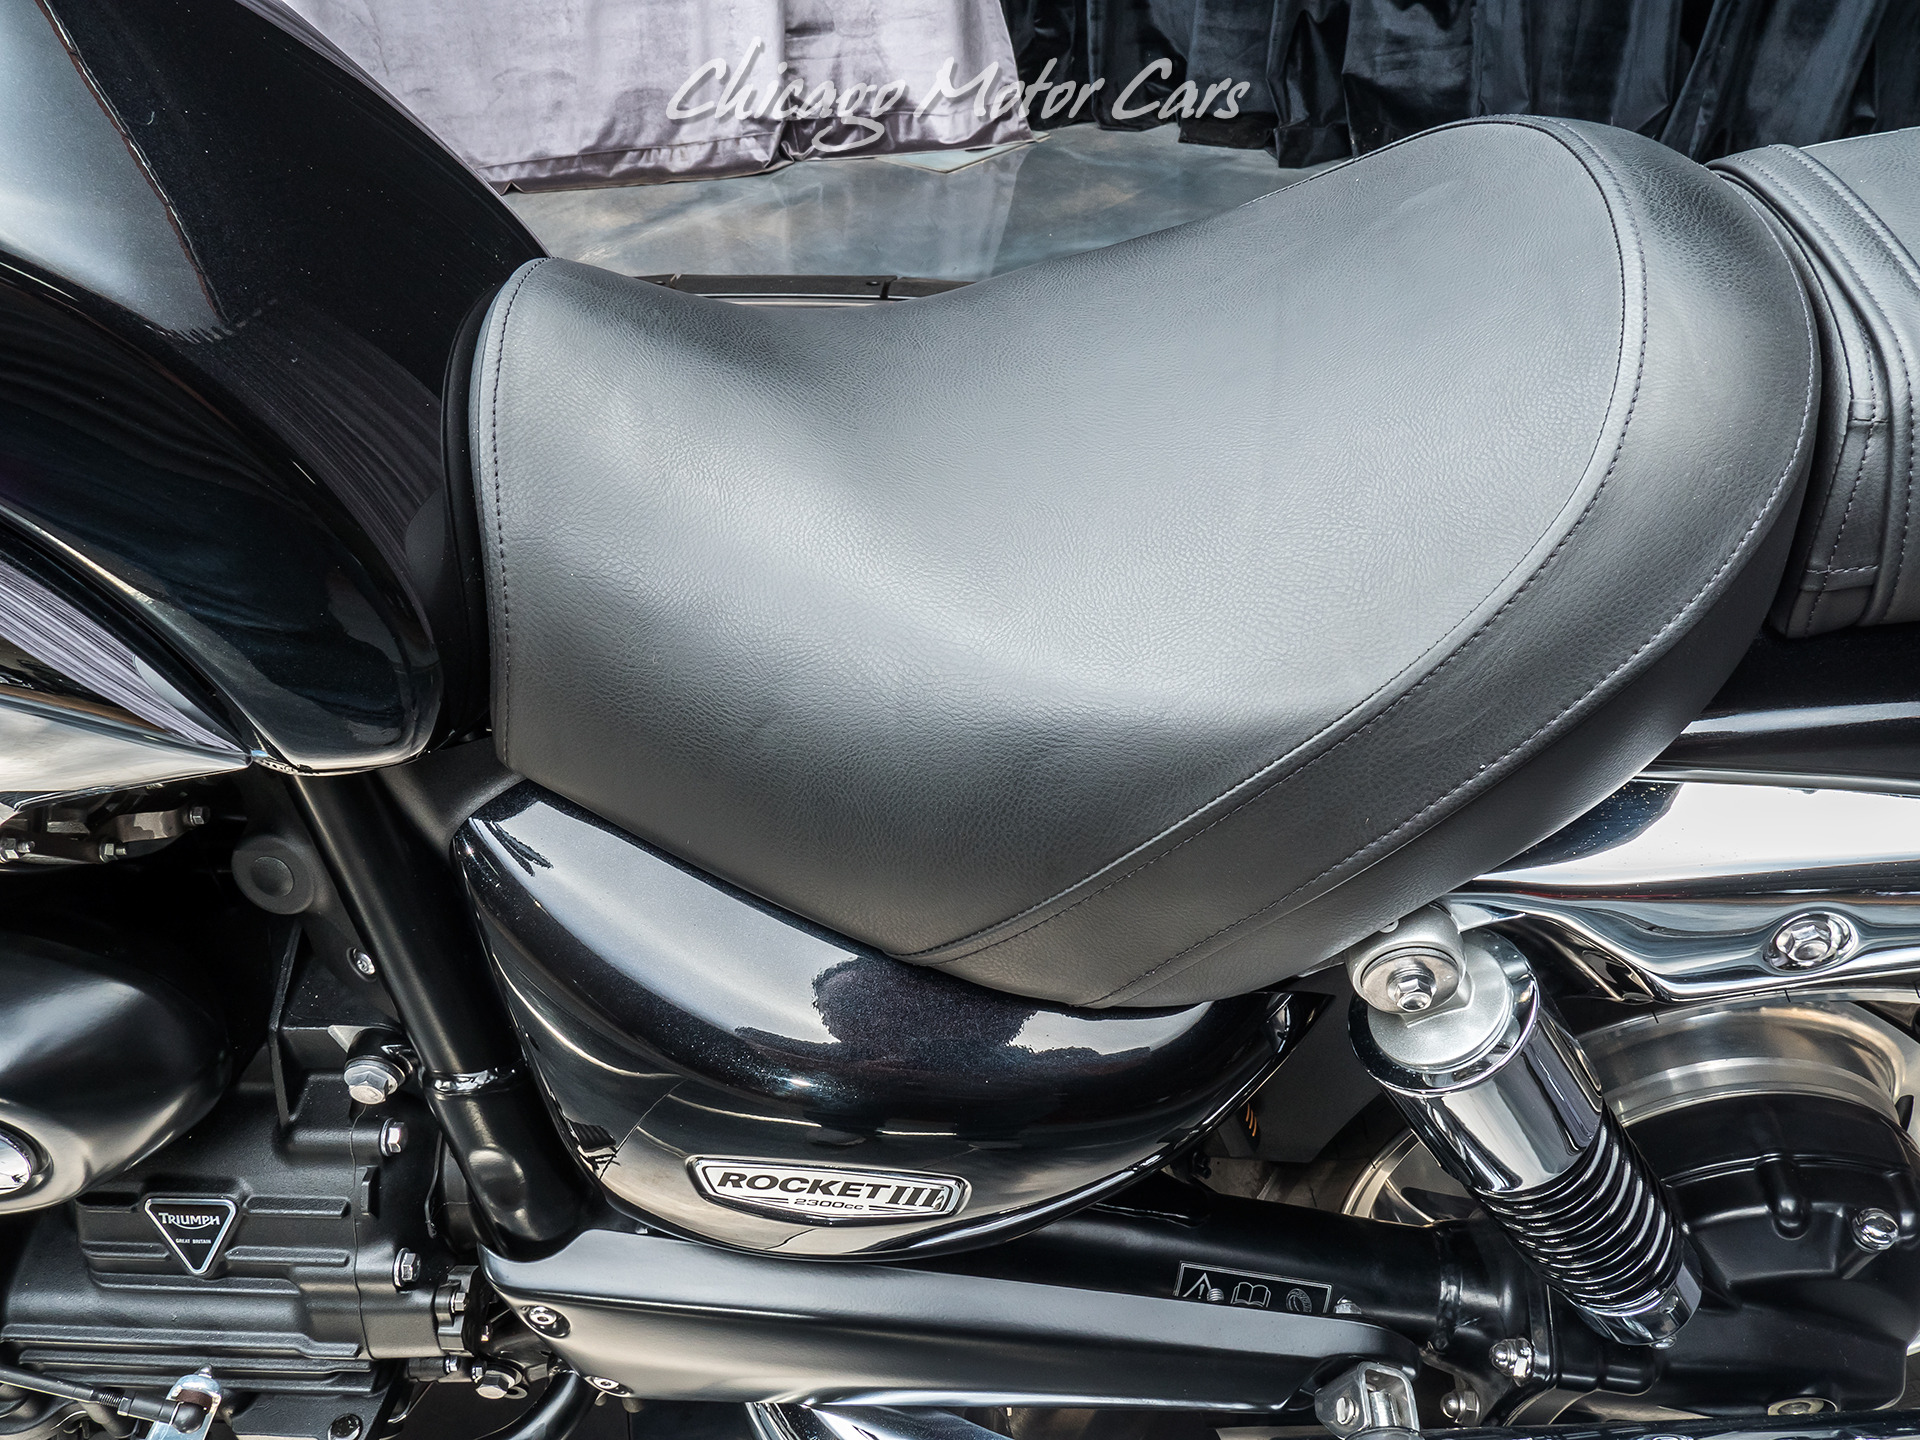 Used-2012-Triumph-Rocket-lll-Motorcycle